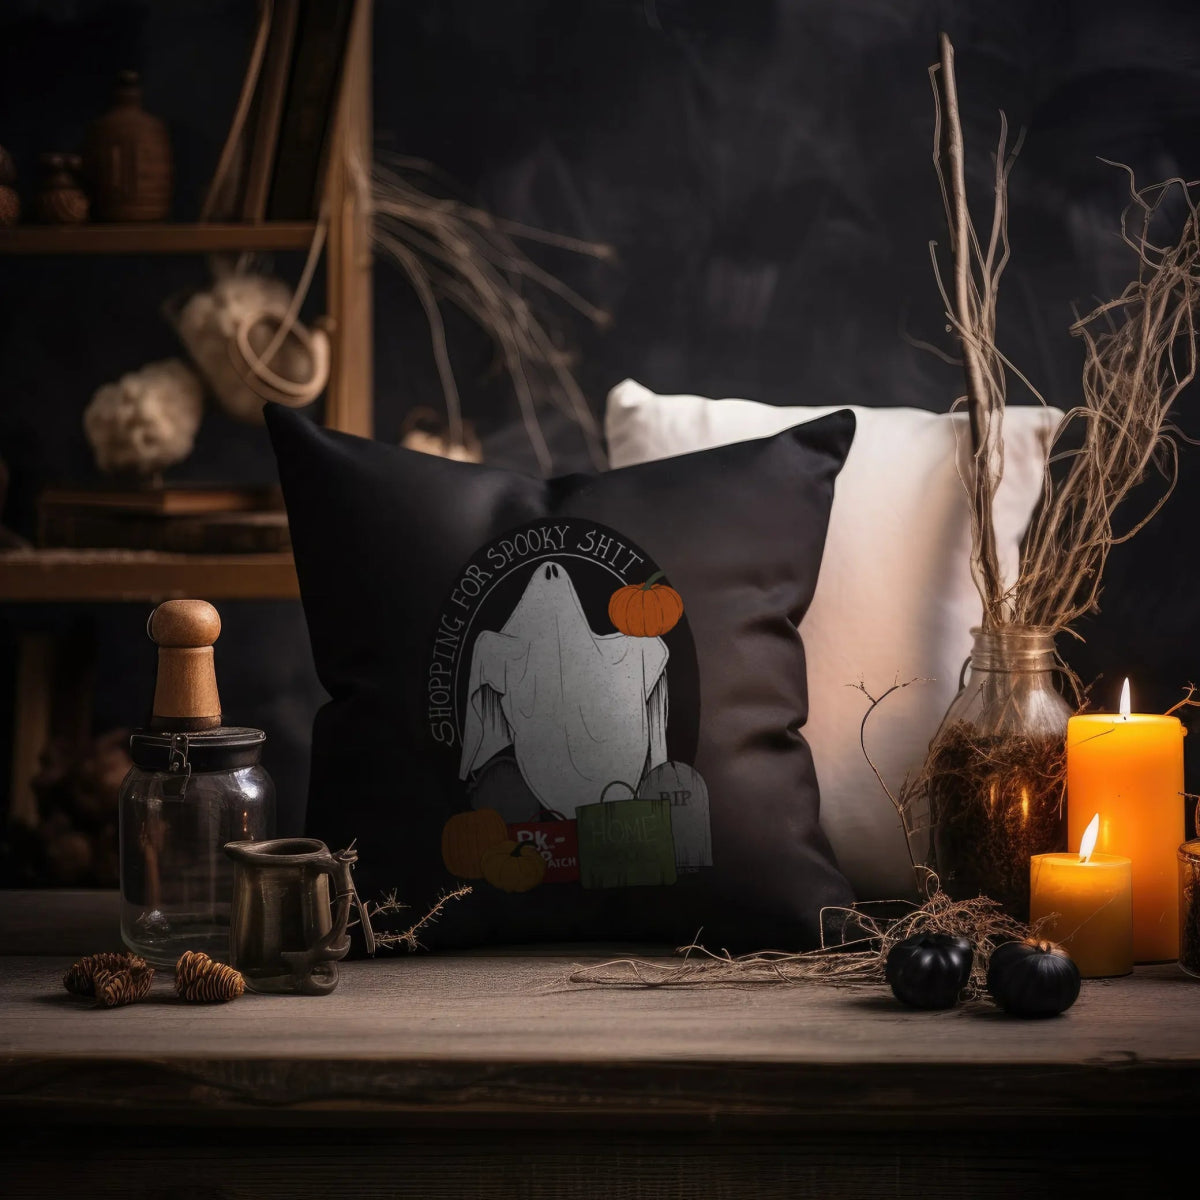 Shopping For Spooky Sh*t Cushion - The Gothic Stationery Company - Homeware